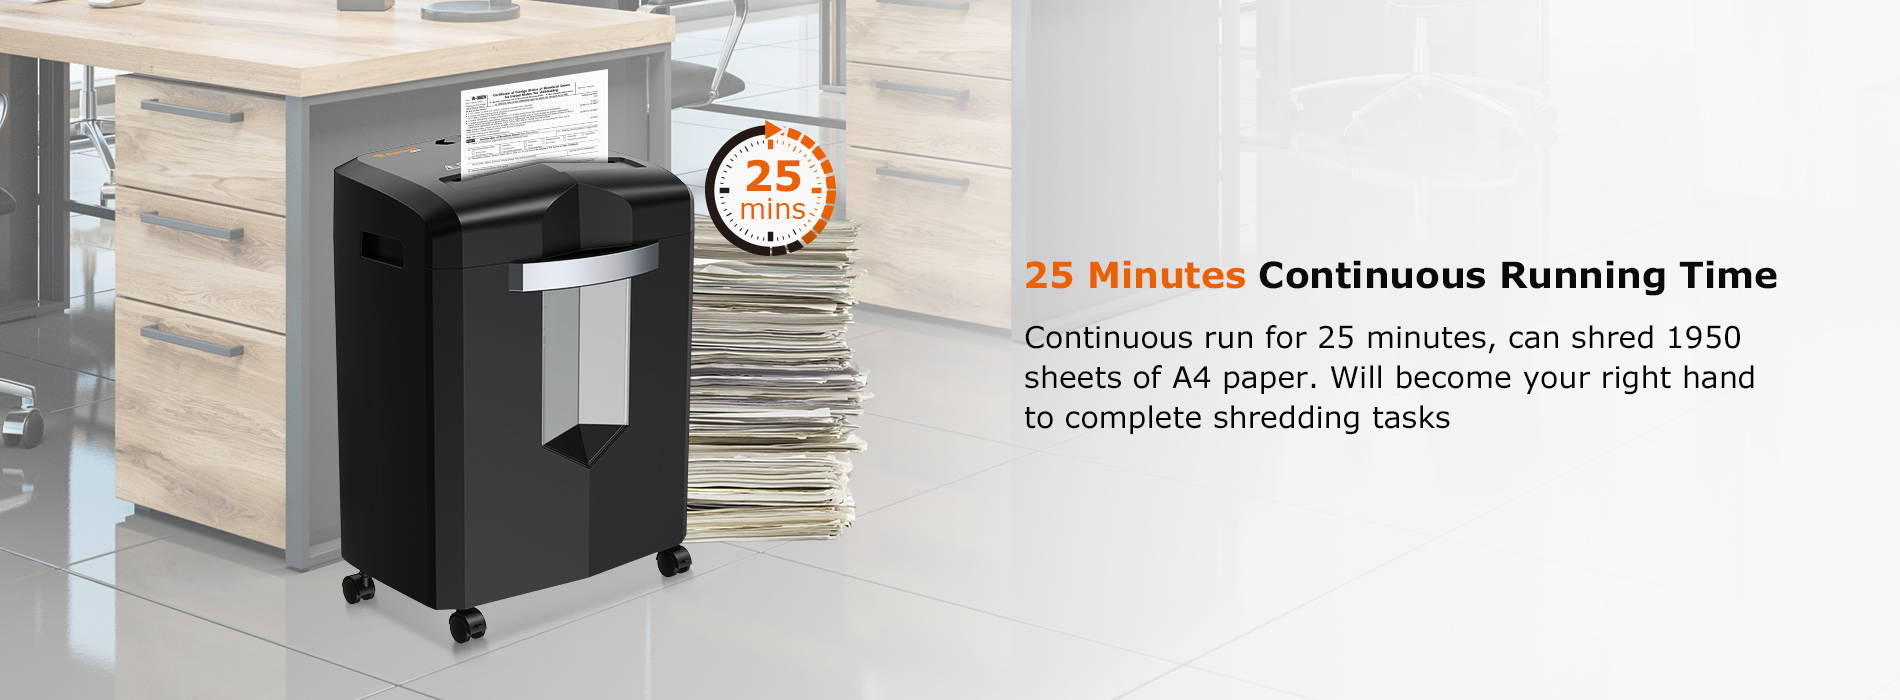 25 Minutes Continuous Running Time   Continuous run for 25 minutes, can shred 1950 sheets of A4 paper. Will become your right hand to complete shredding tasks